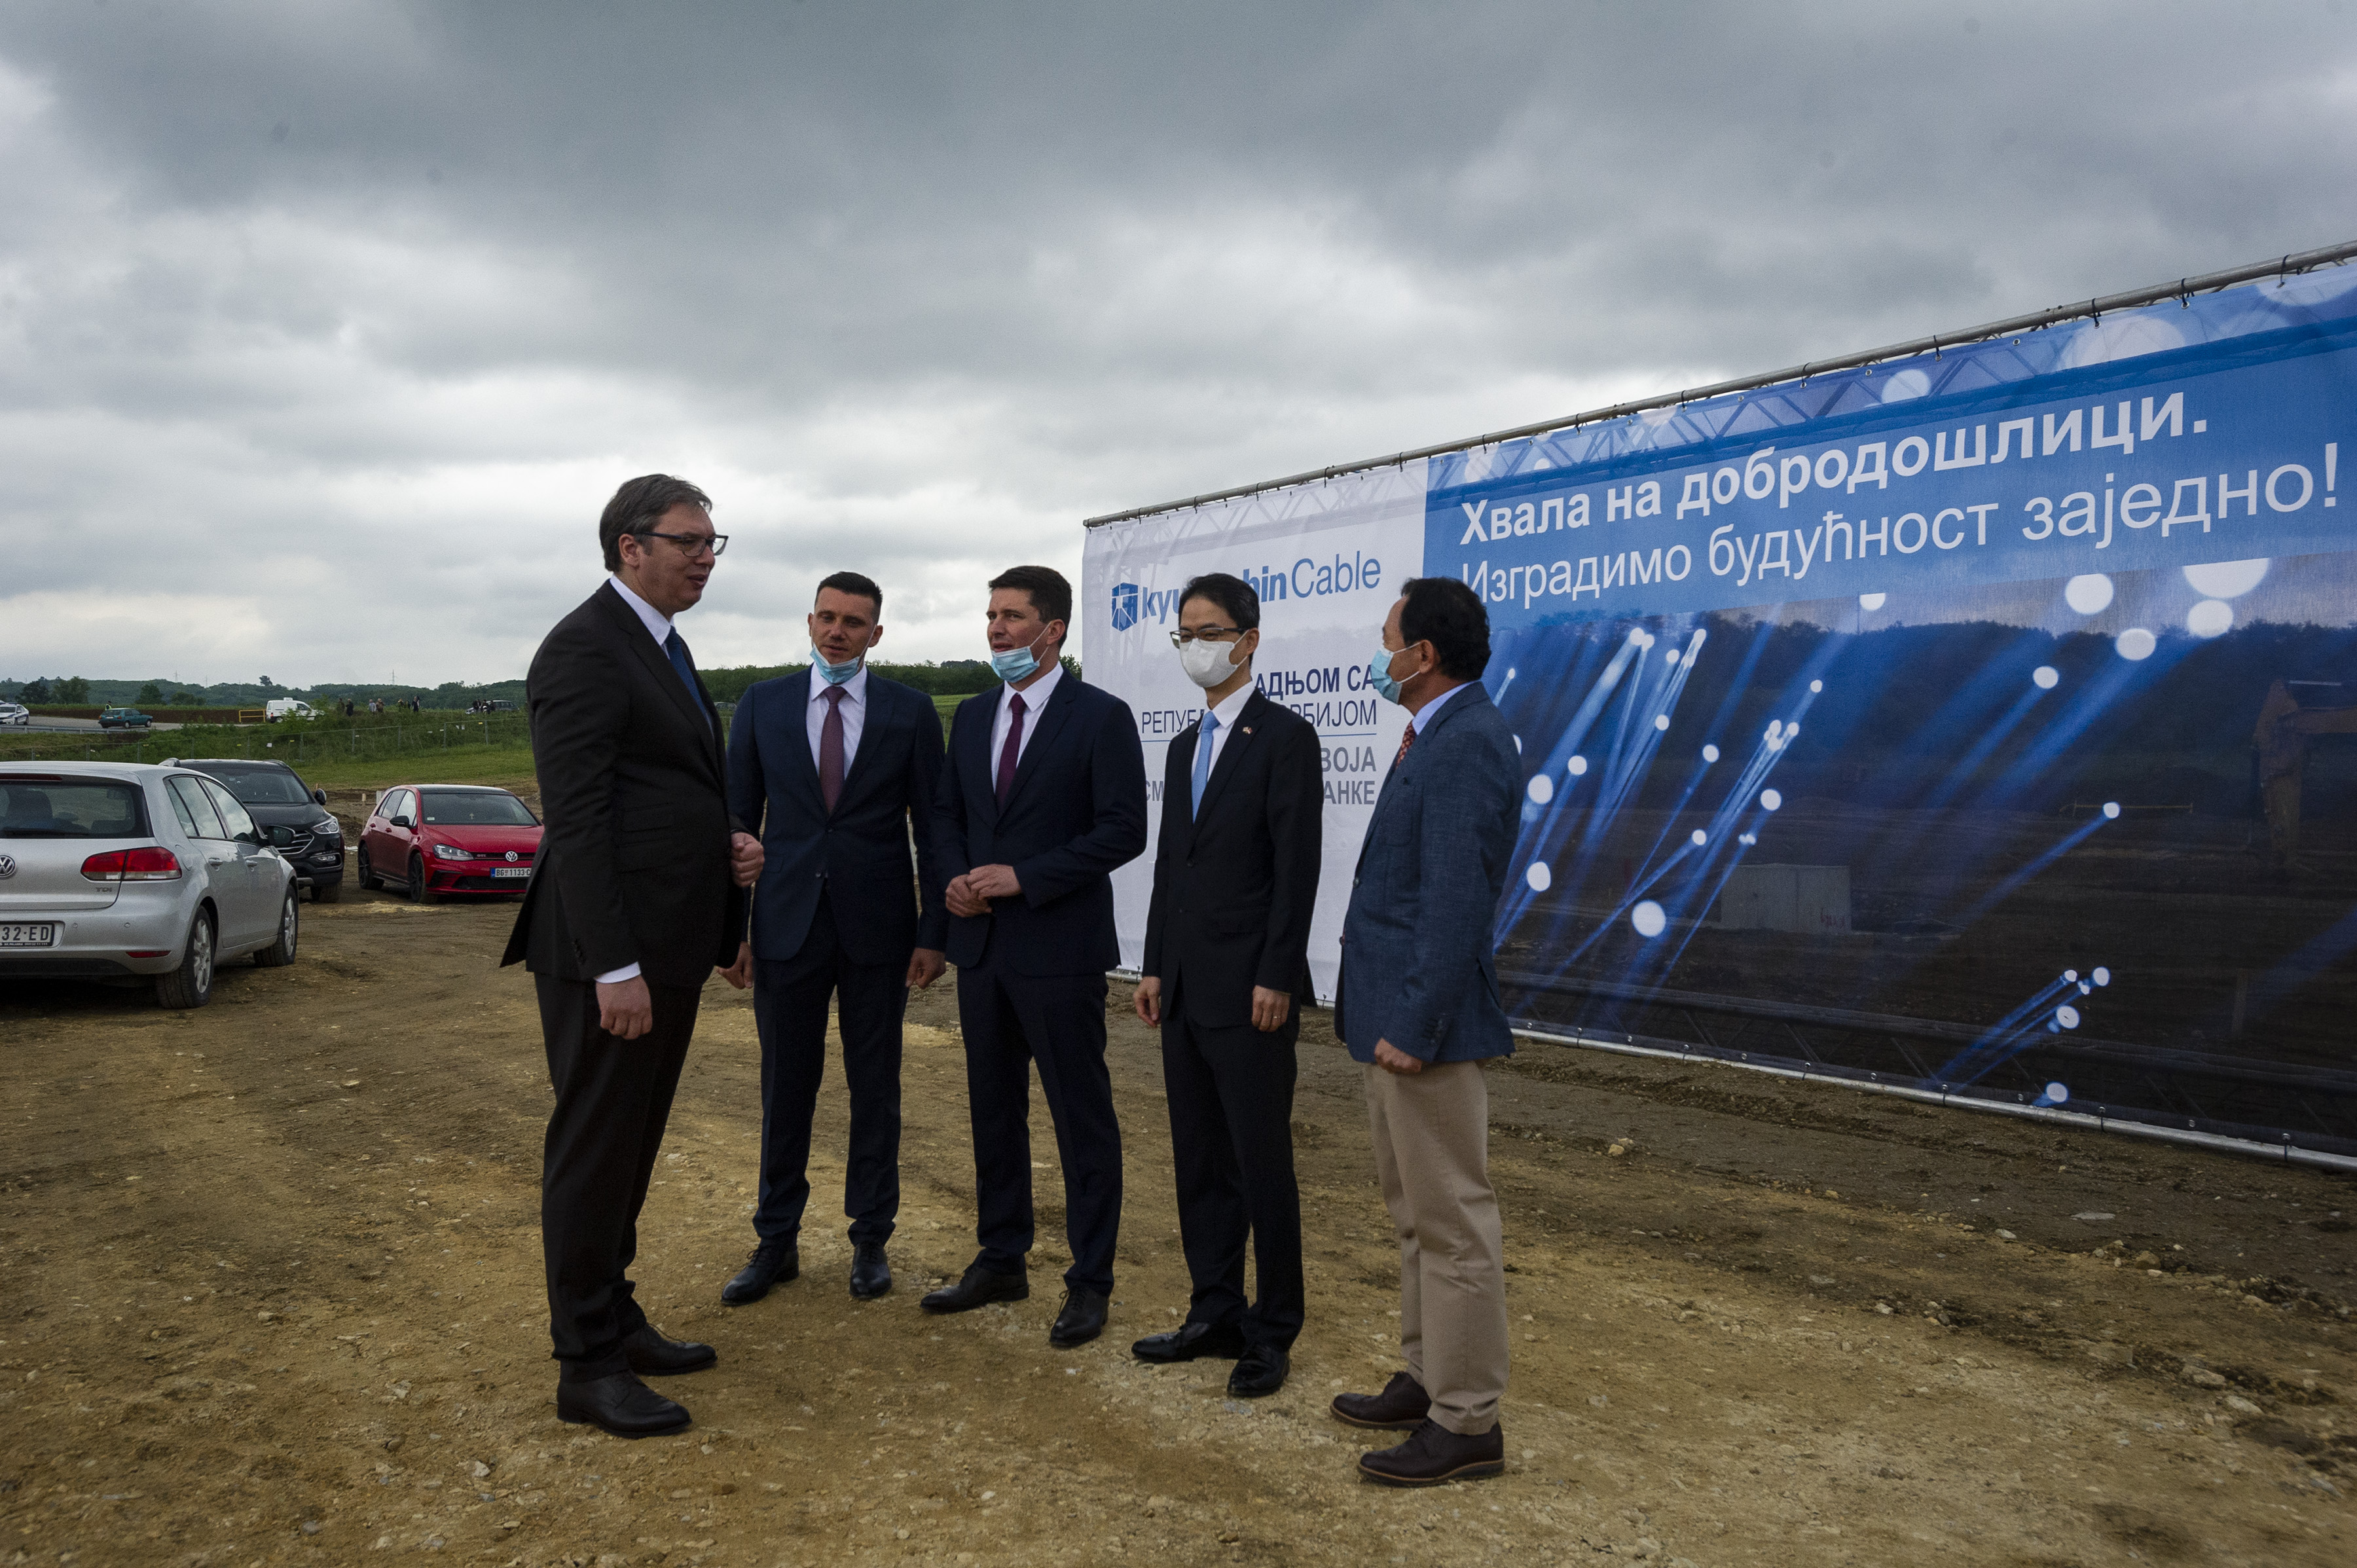 Groundbreaking ceremony for Kyungshin factory â 700 new jobs | Ras